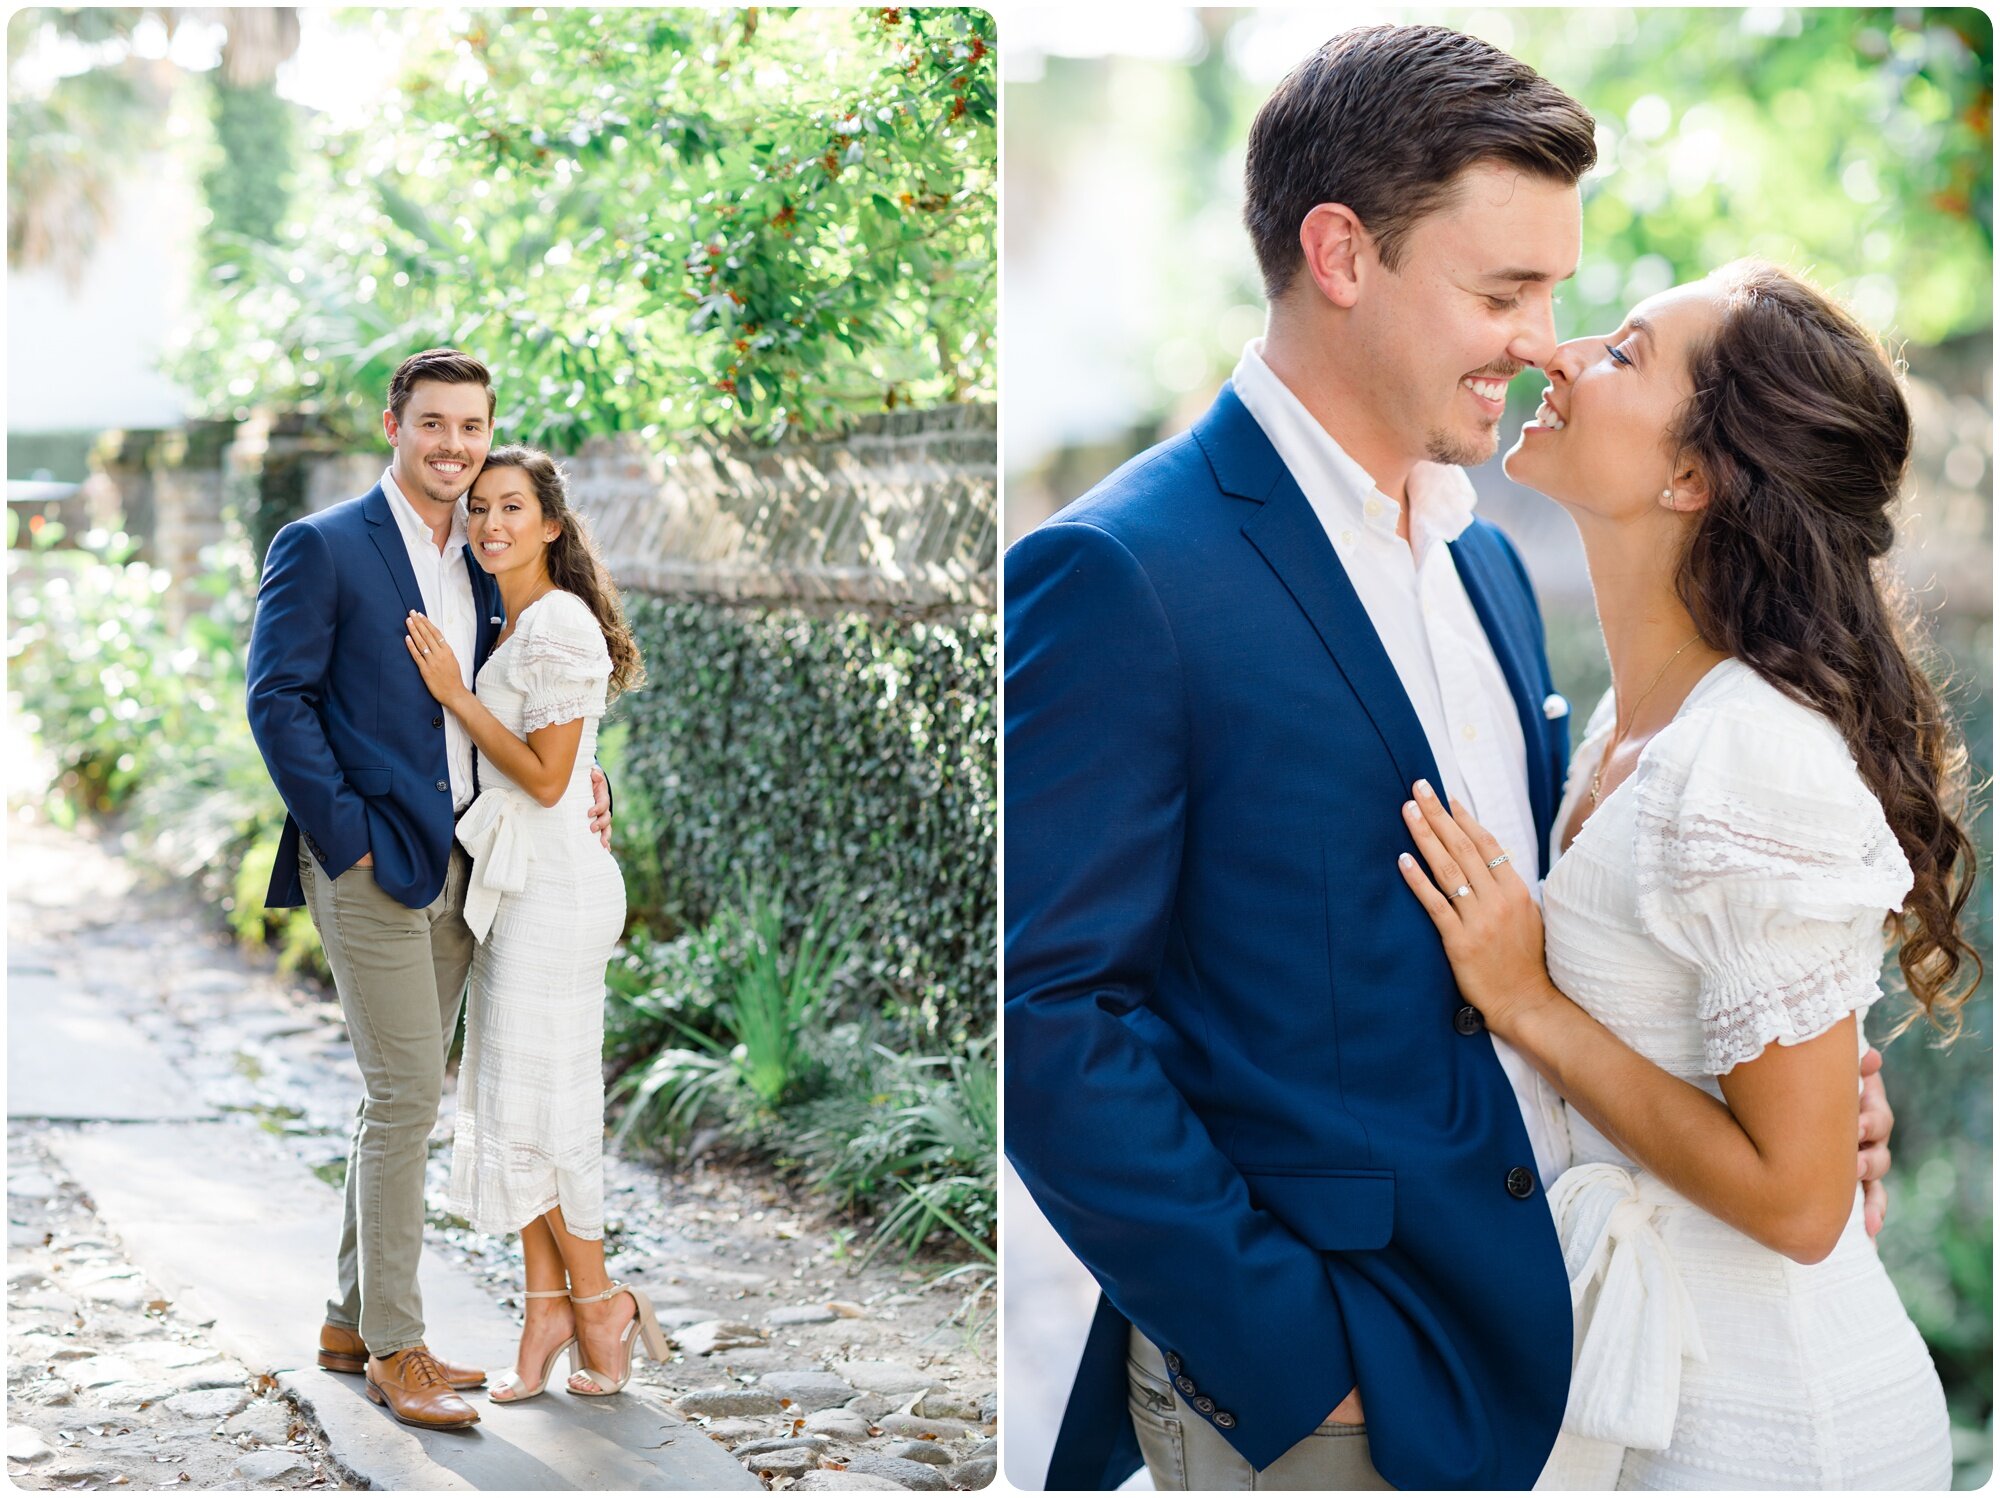 outdoor_engagement_session_candid_natural_charleston_destination_wedding_rainbow_row_colorful_kailee_dimeglio_photography_0008.jpg